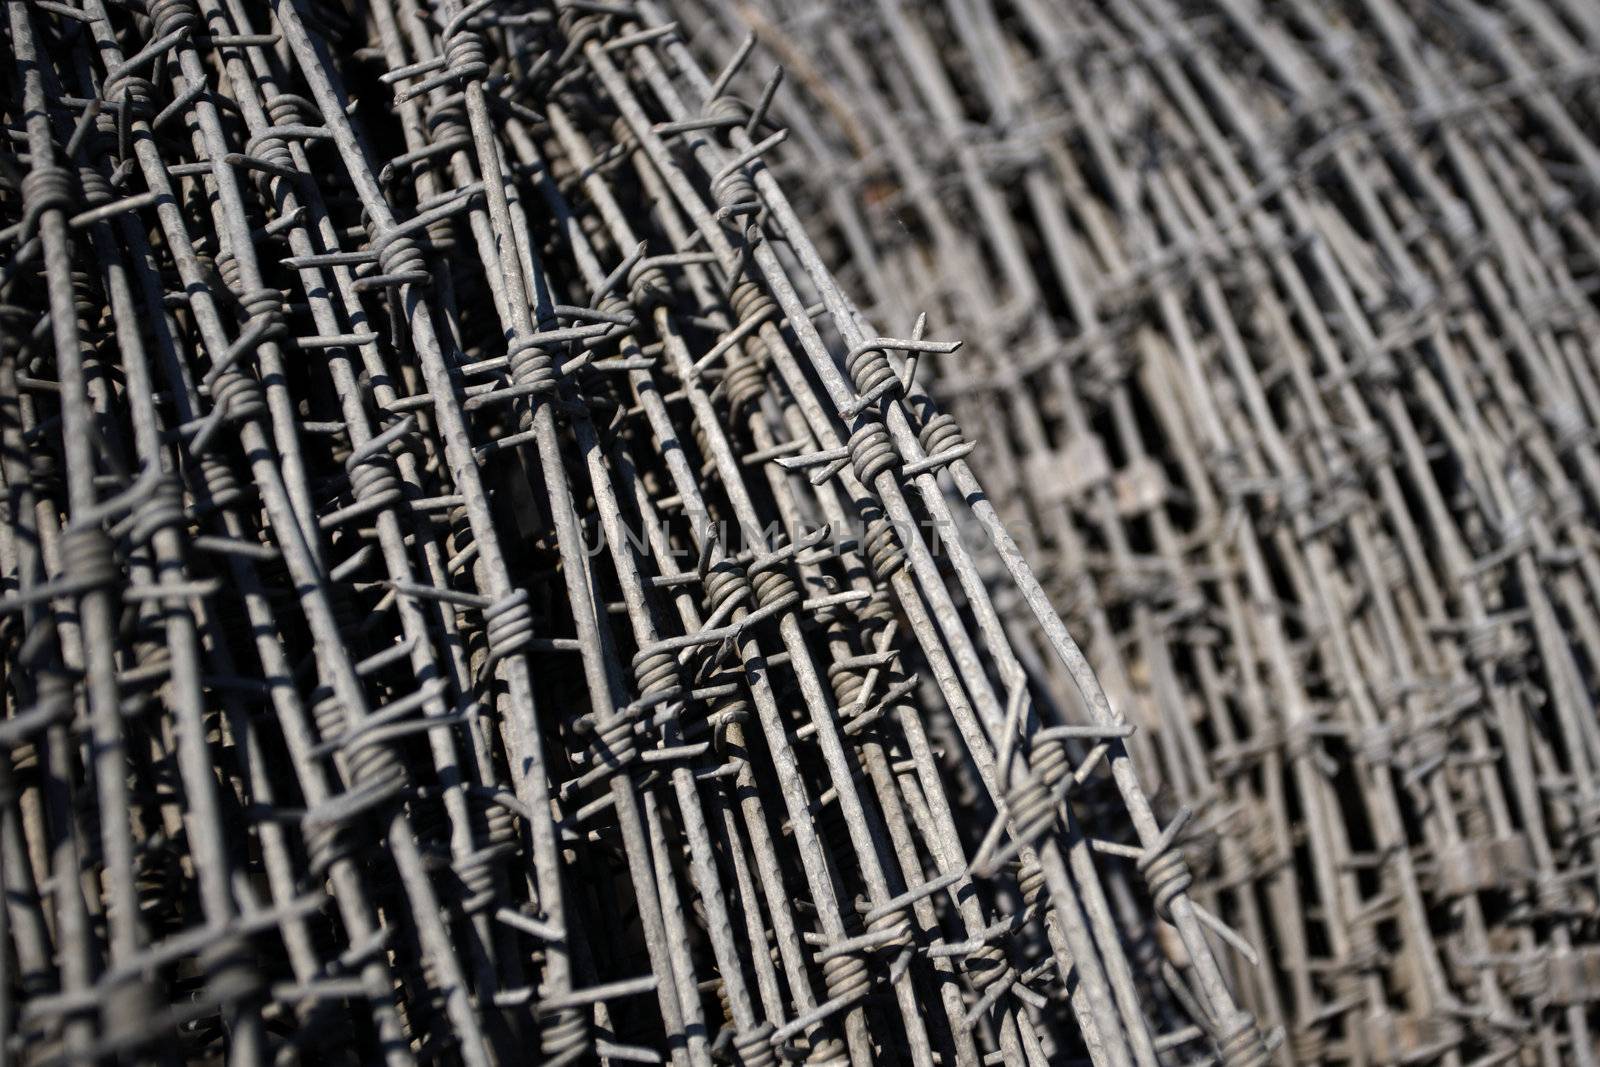 Rolls of barbed wire stacked in an army base.
